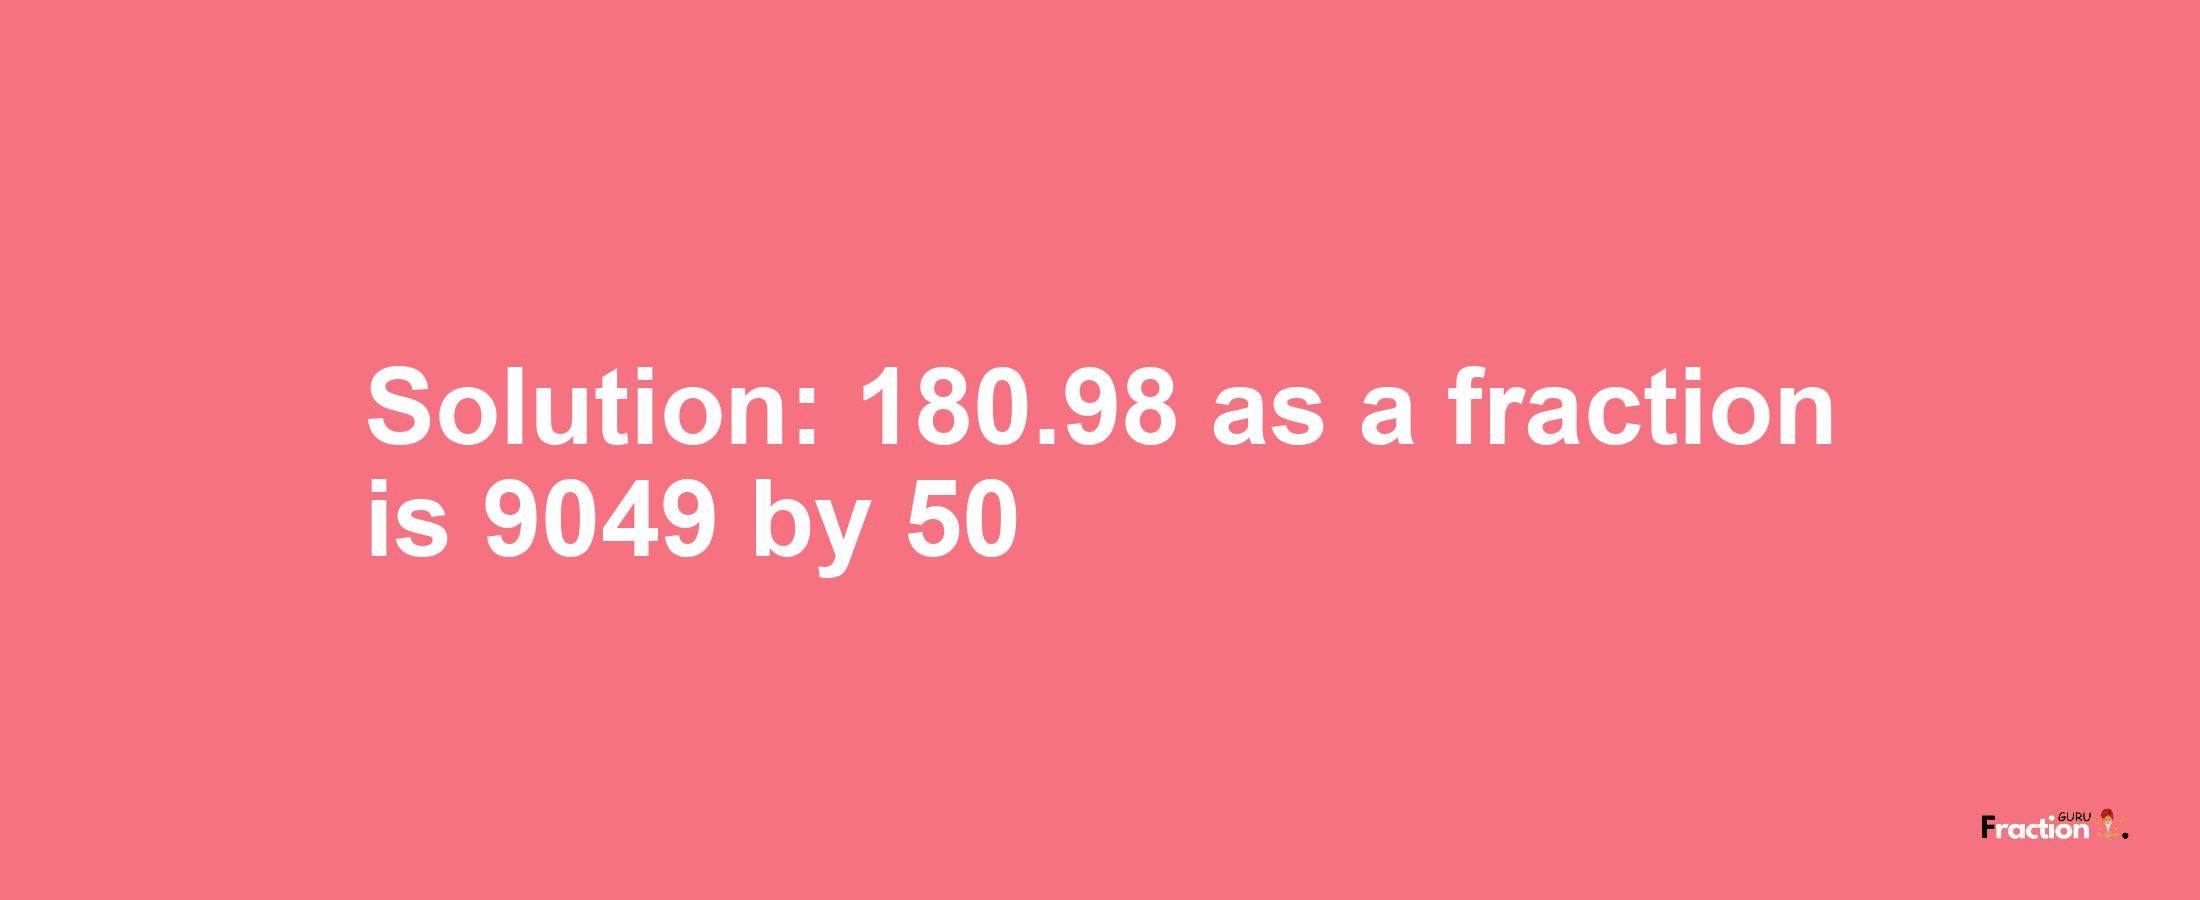 Solution:180.98 as a fraction is 9049/50